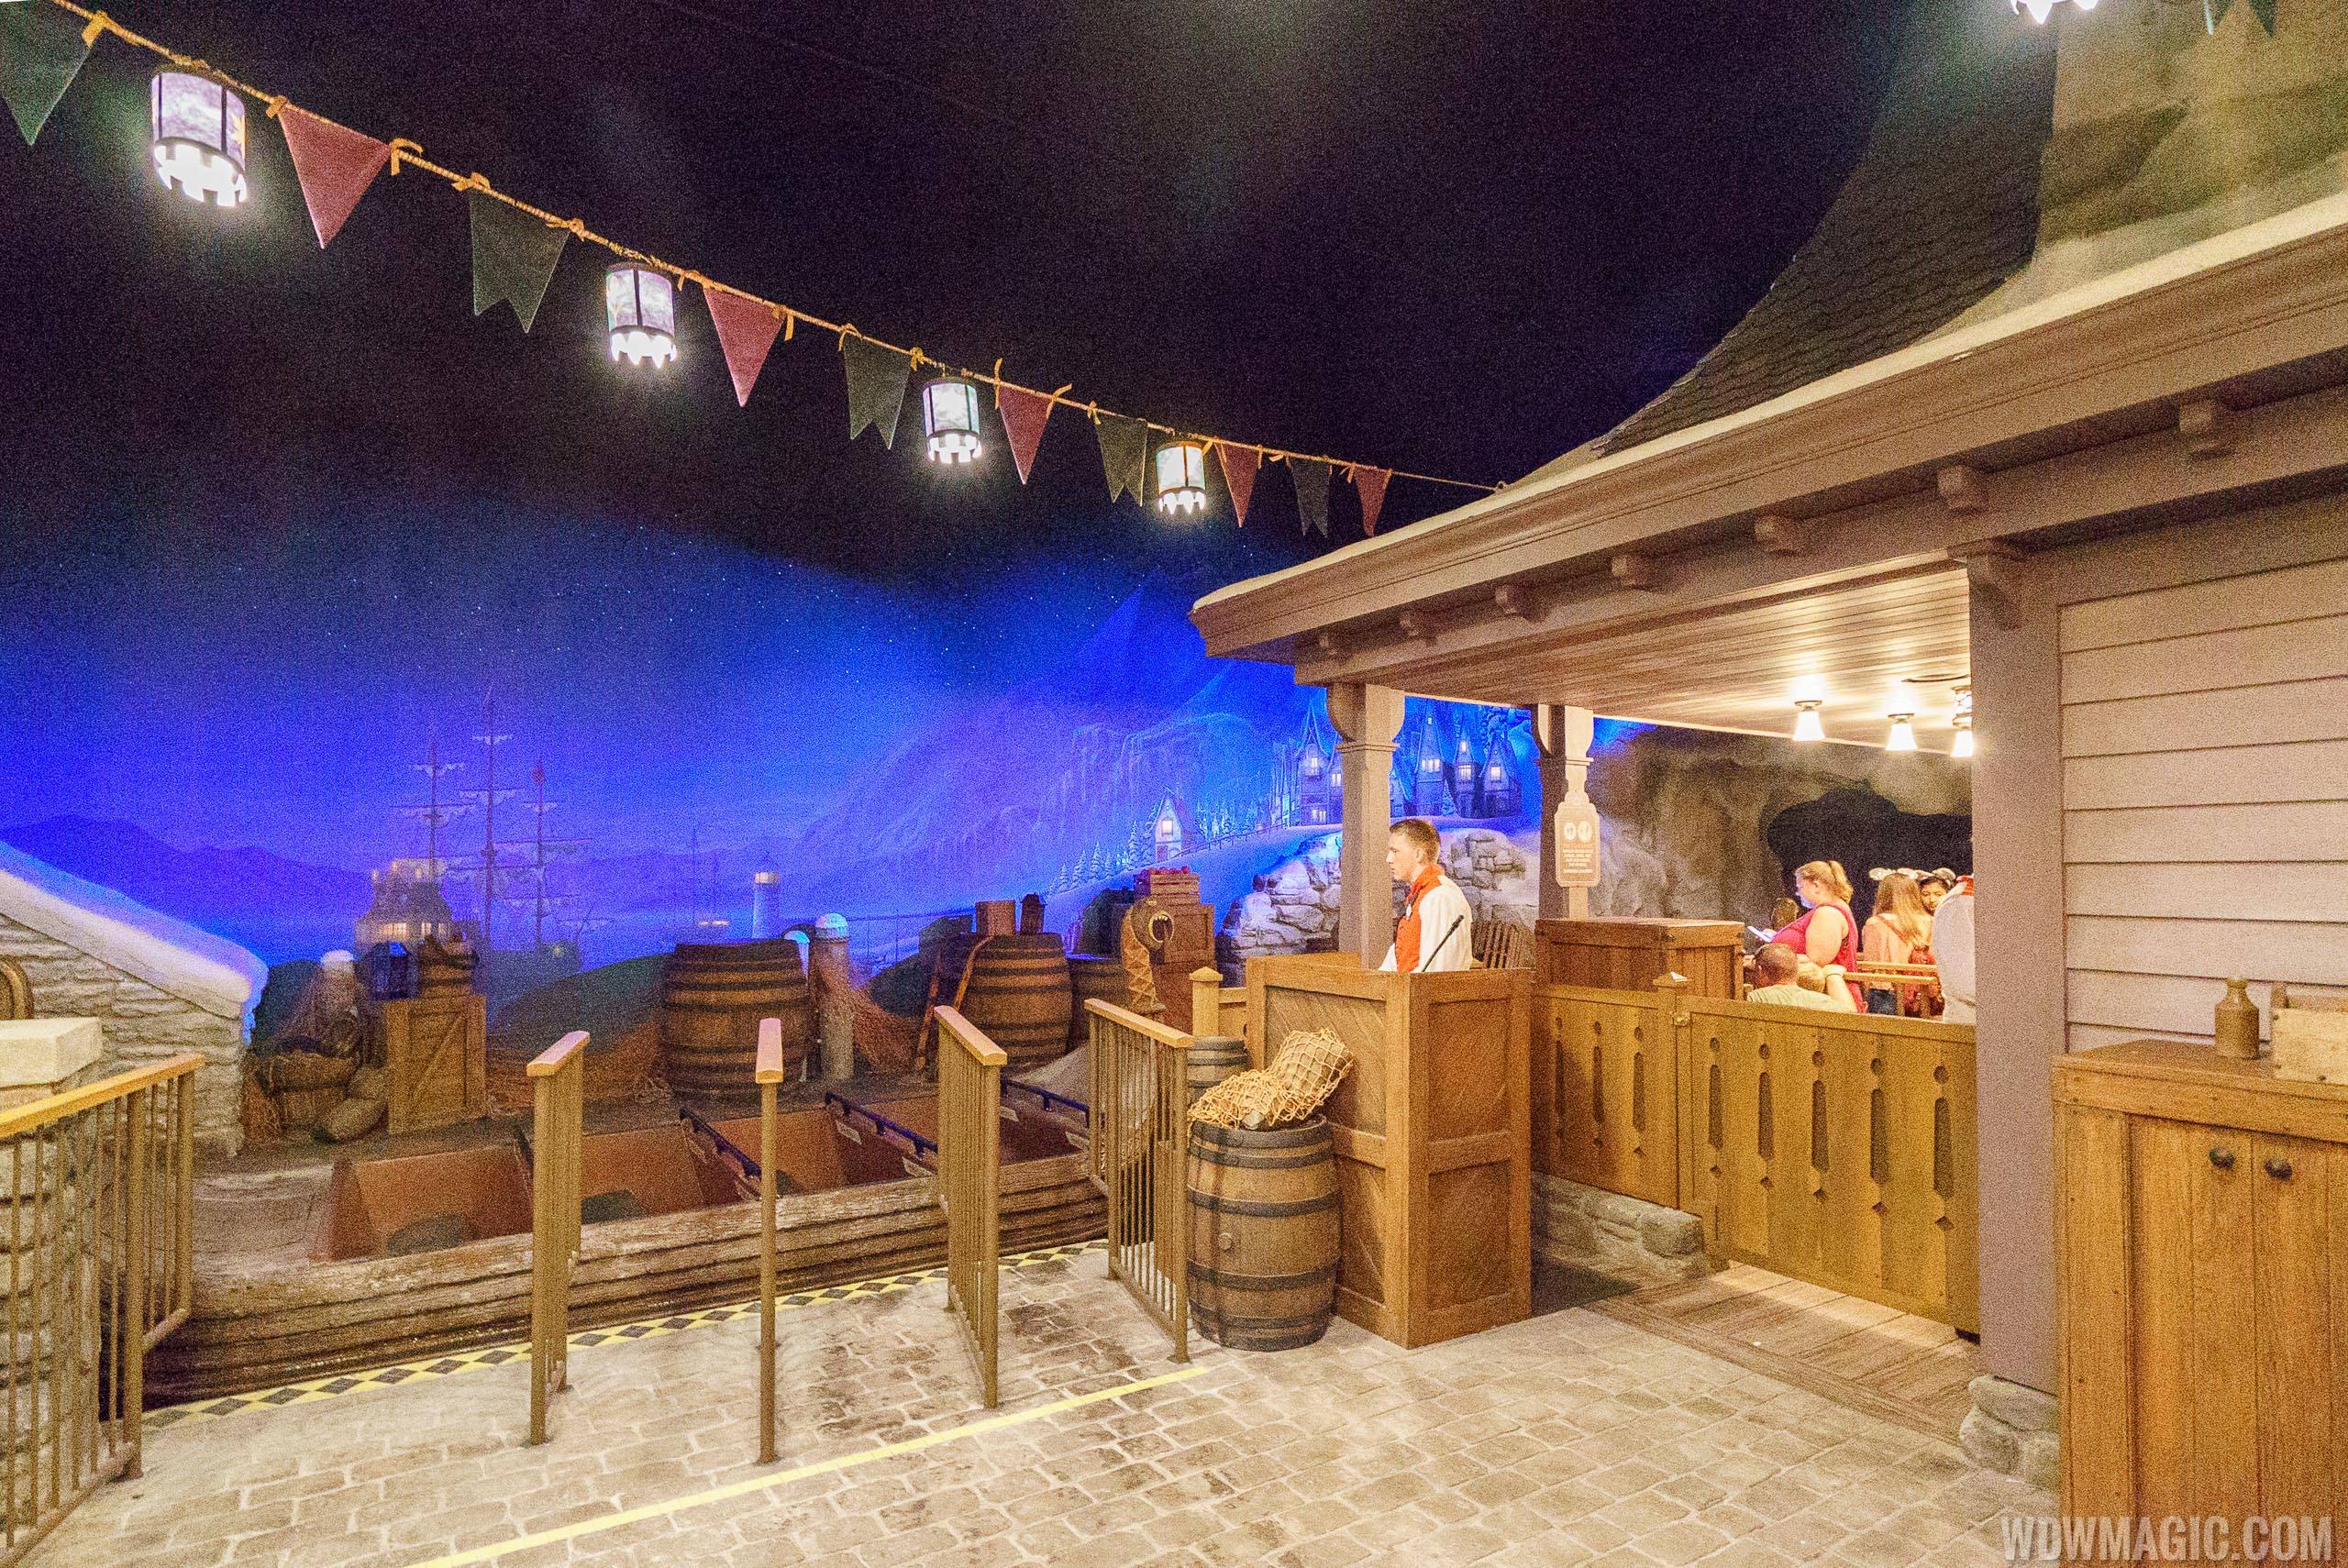 Loading area at Frozen Ever After